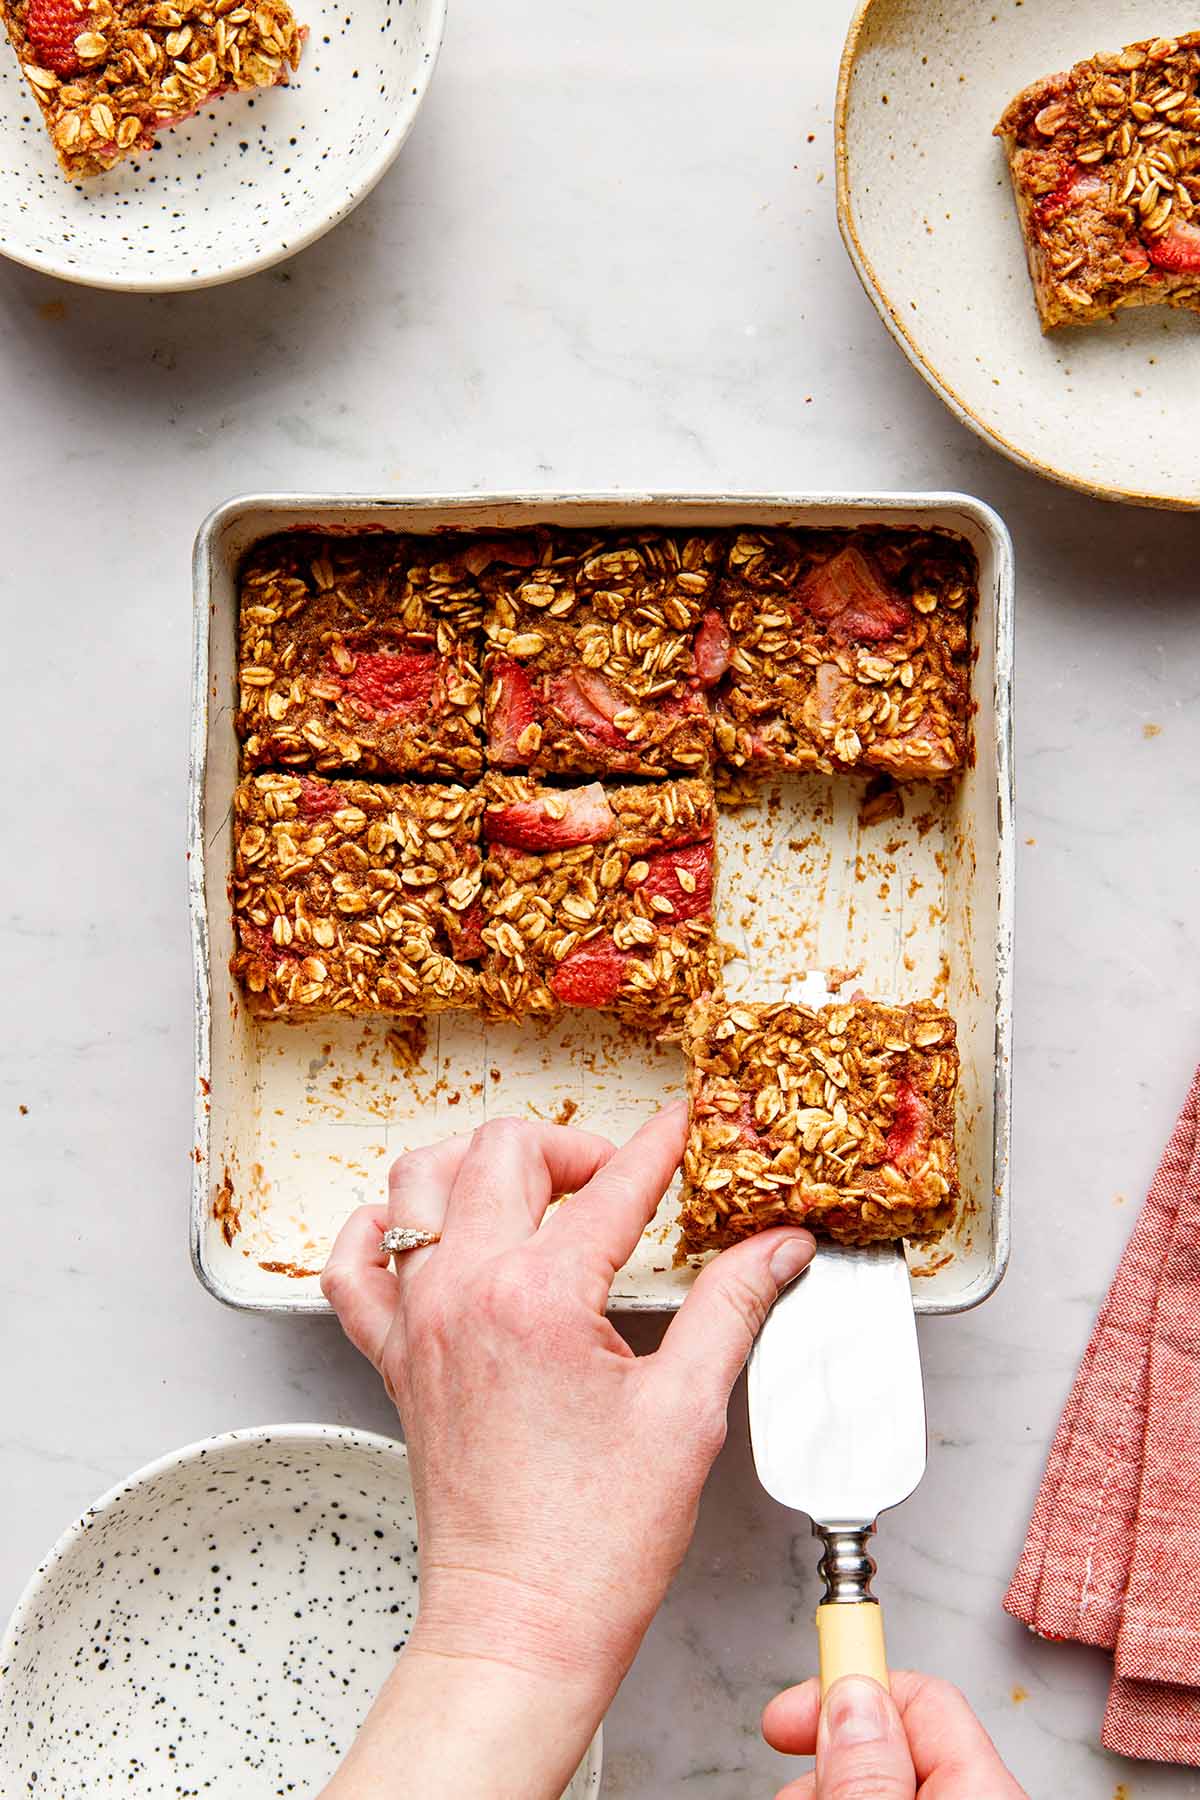 A hand using a pie lifter to lift a square slice of vegan strawberry baked oatmeal from a square baking tin.